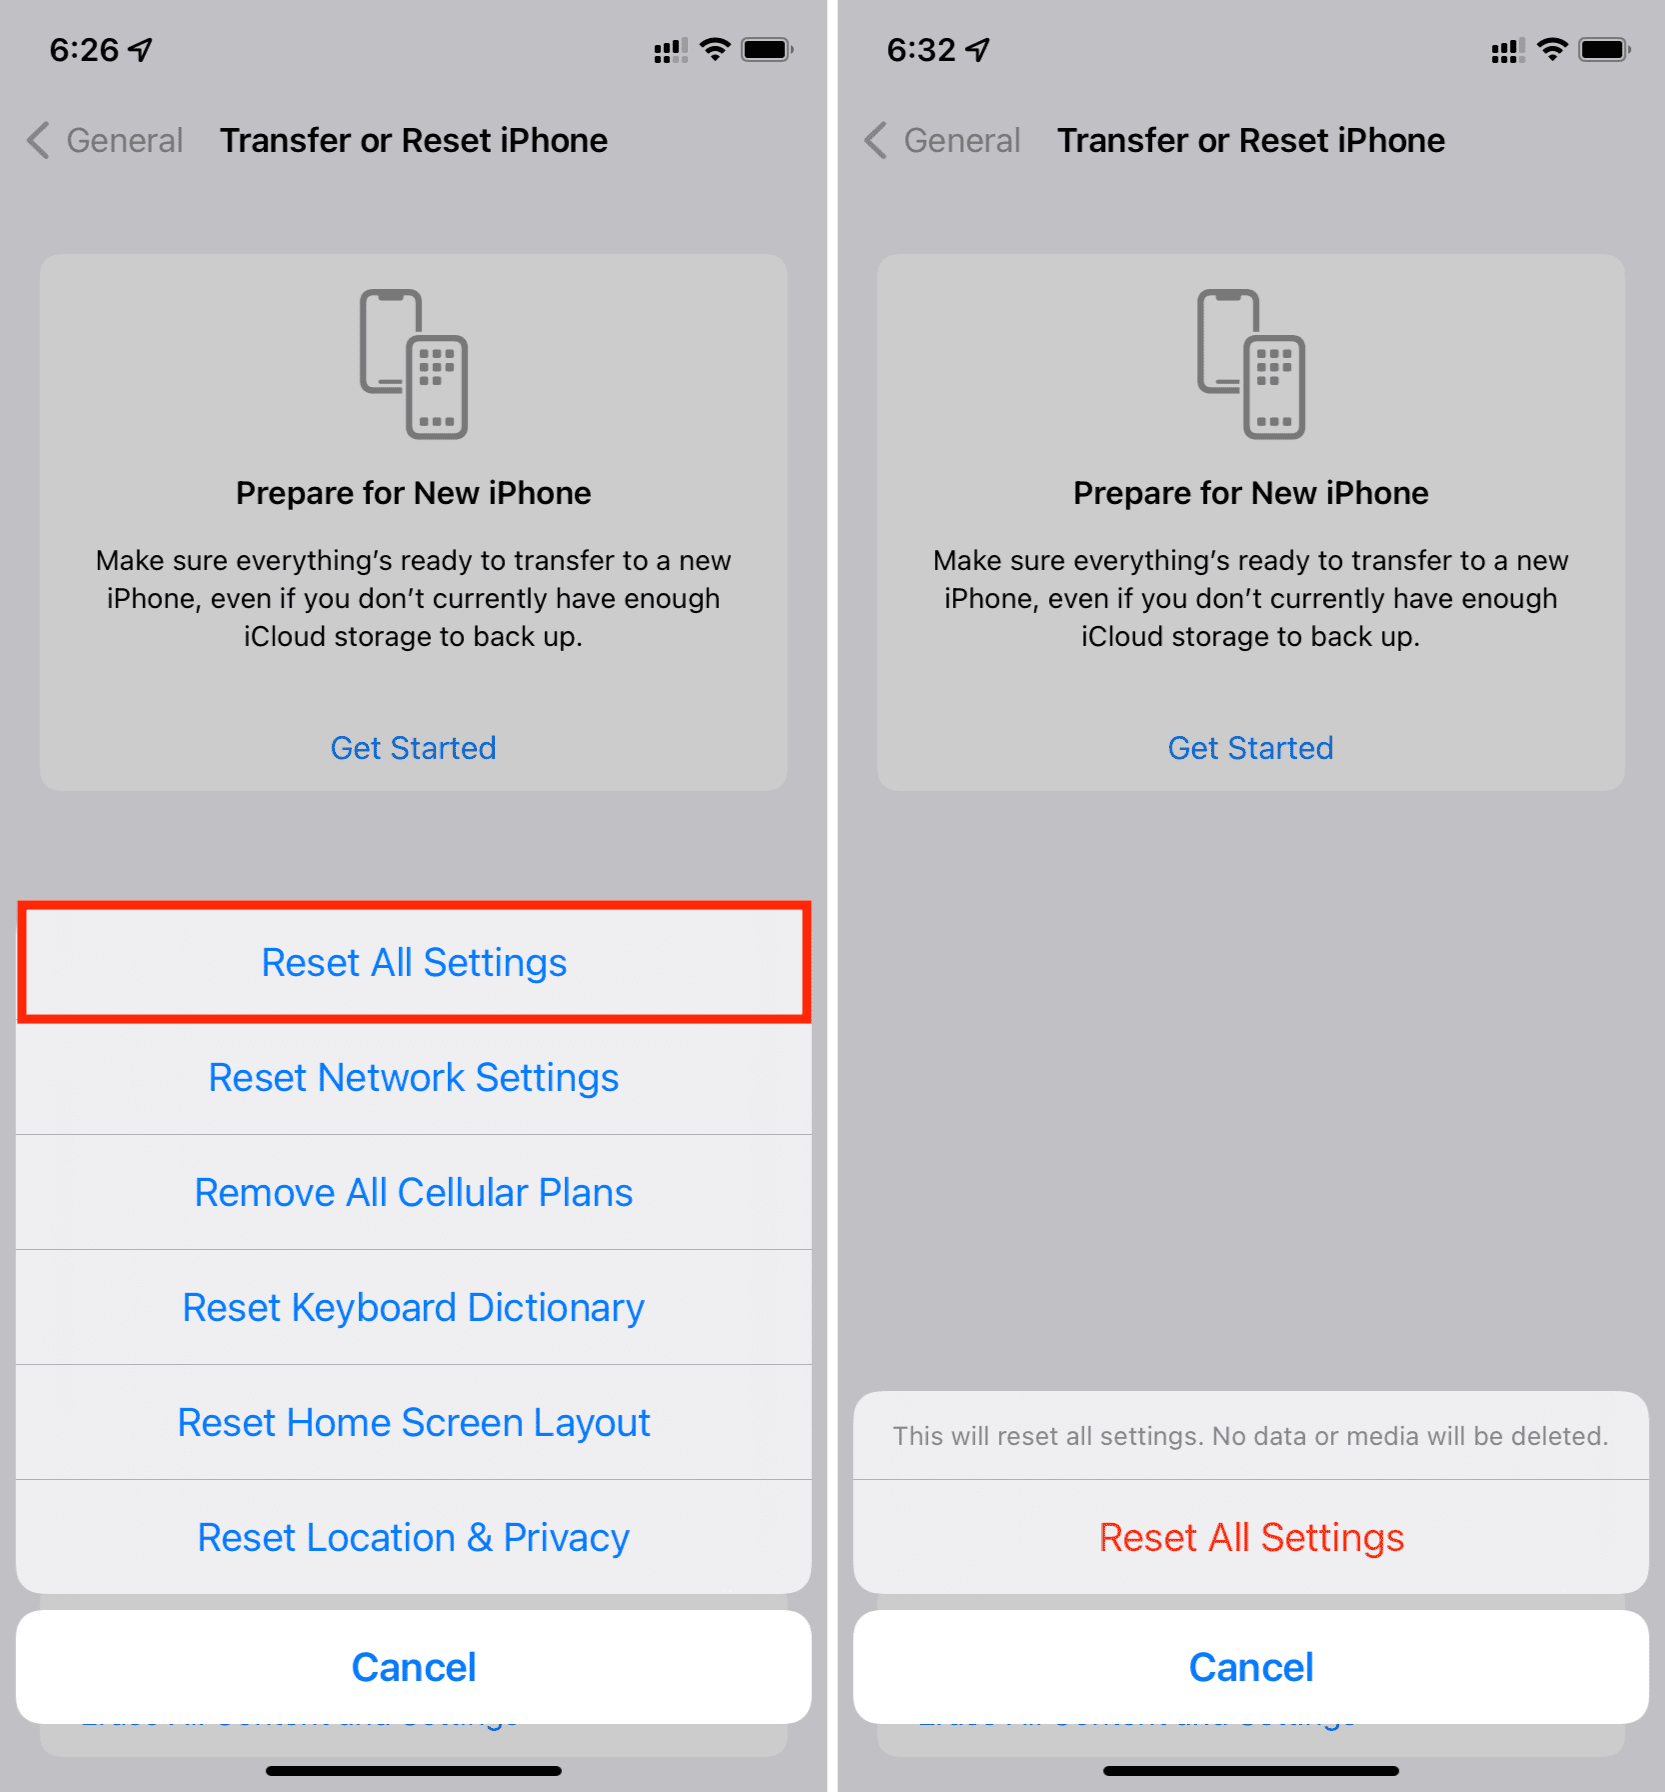 Check your Apple ID and iCloud settings
Reset all settings on your iPhone